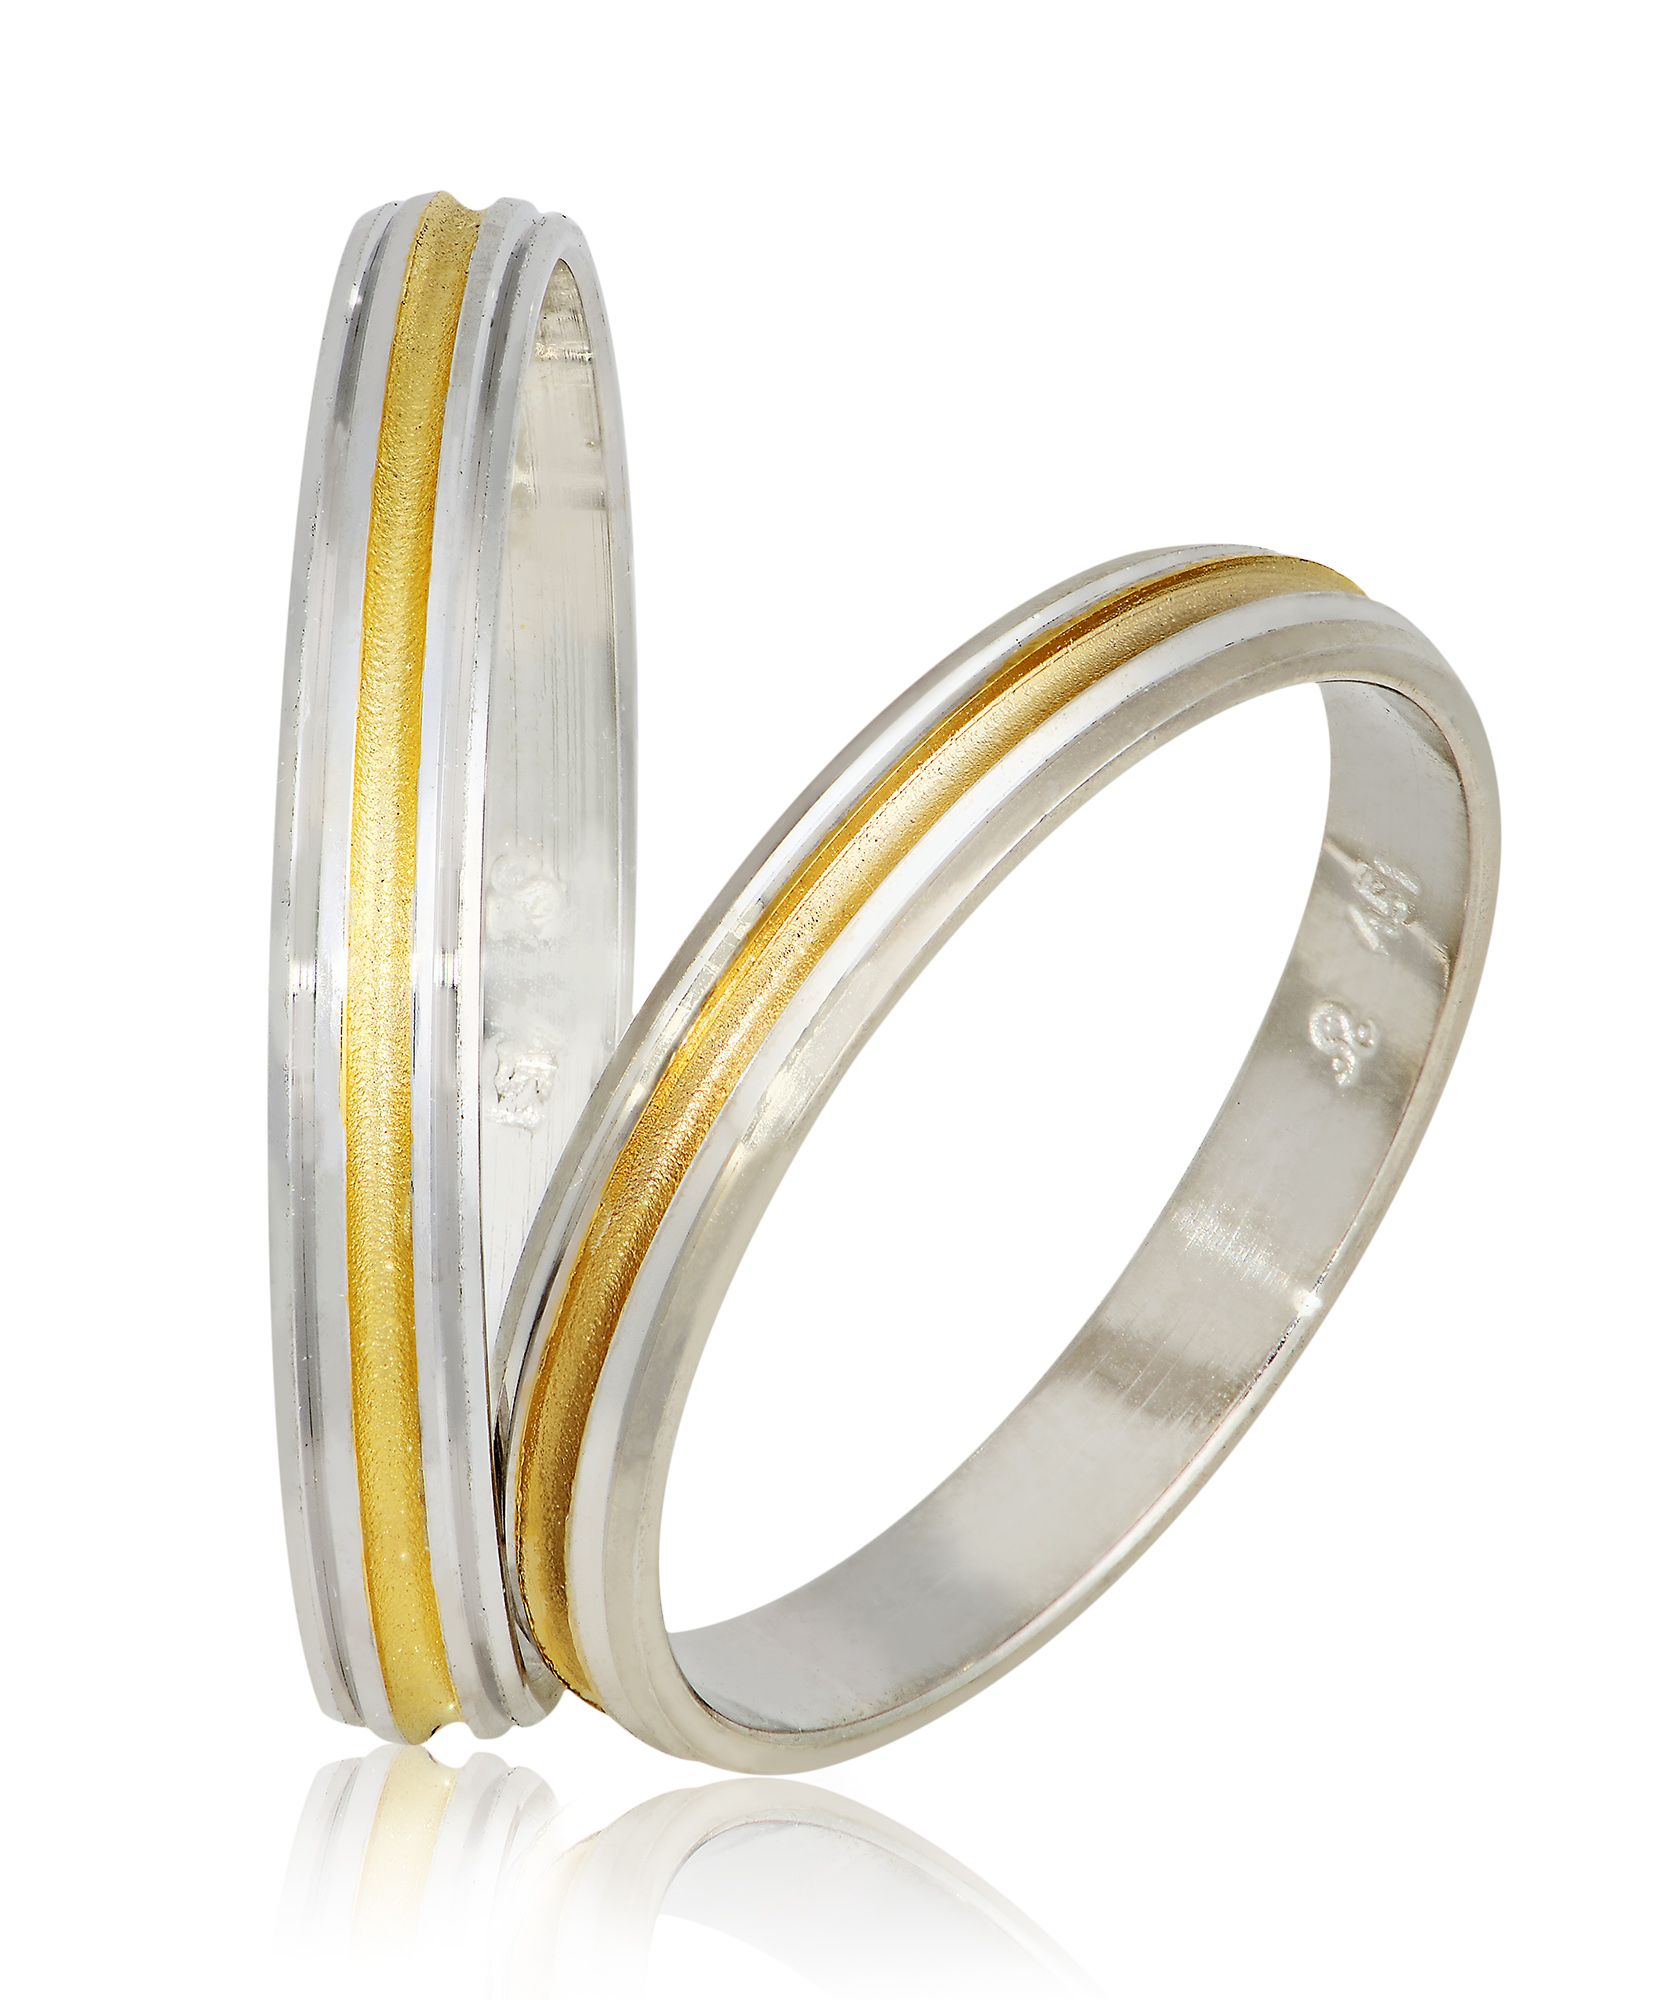 White gold & gold wedding rings 3mm (code Sxx4)